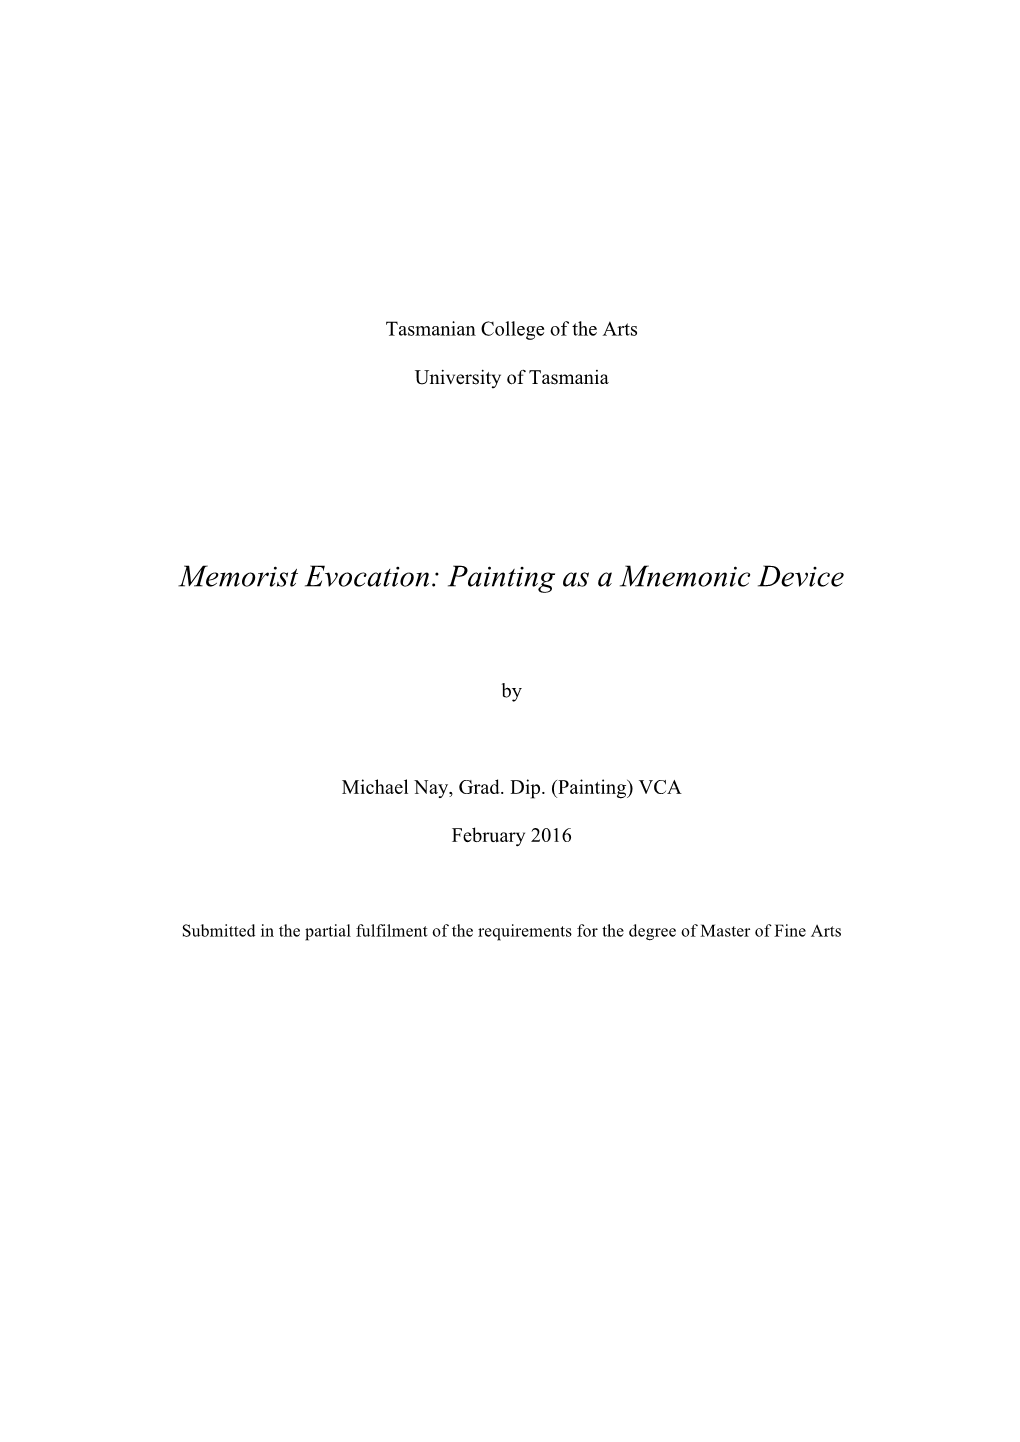 Memorist Evocation: Painting As a Mnemonic Device